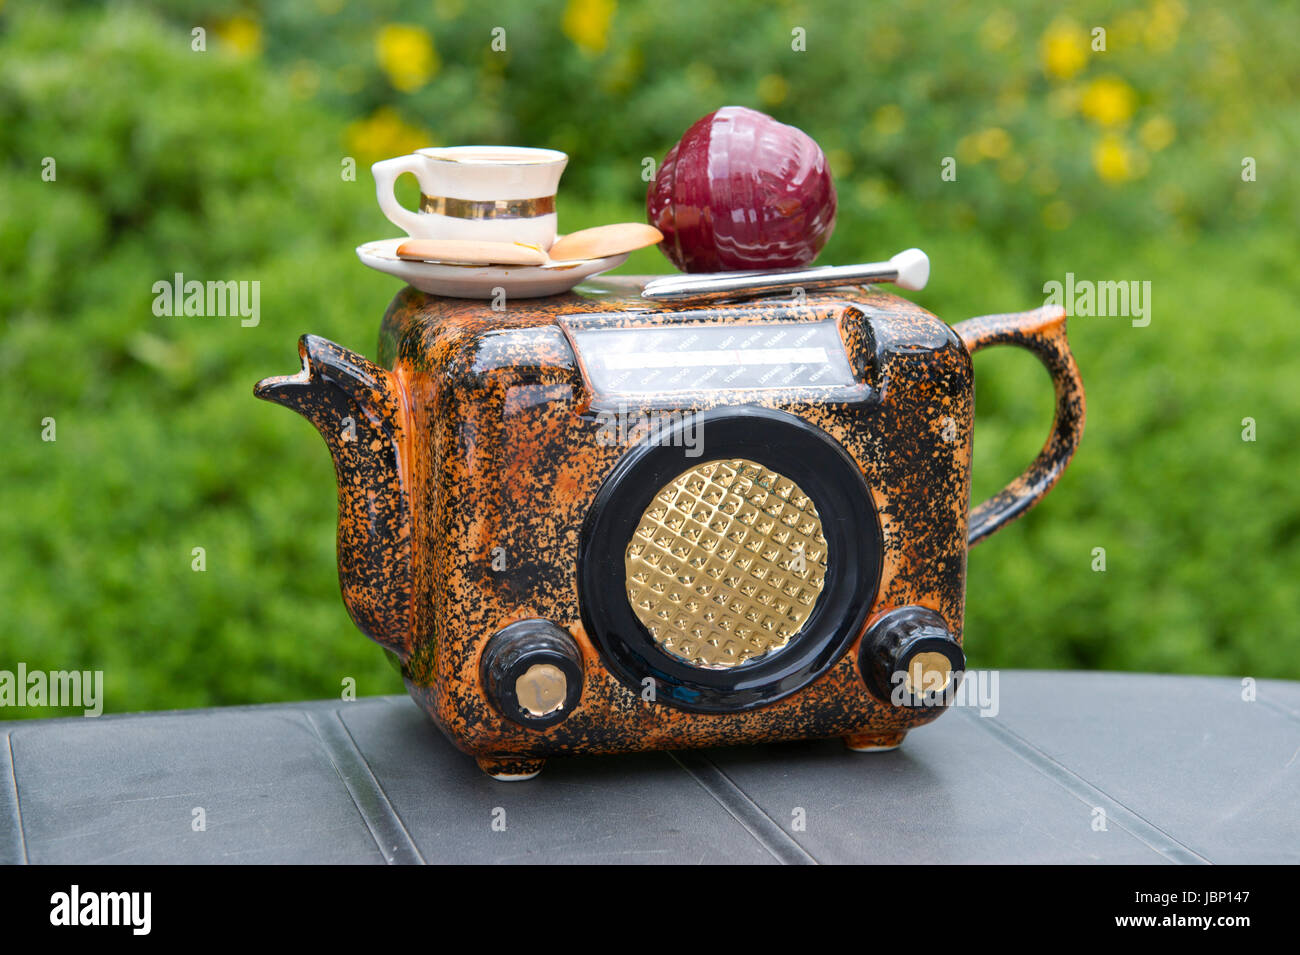 A novelty teapot in the shape of a radio with a cup of tea and biscuits and knitting needles and ball of wool. Stock Photo